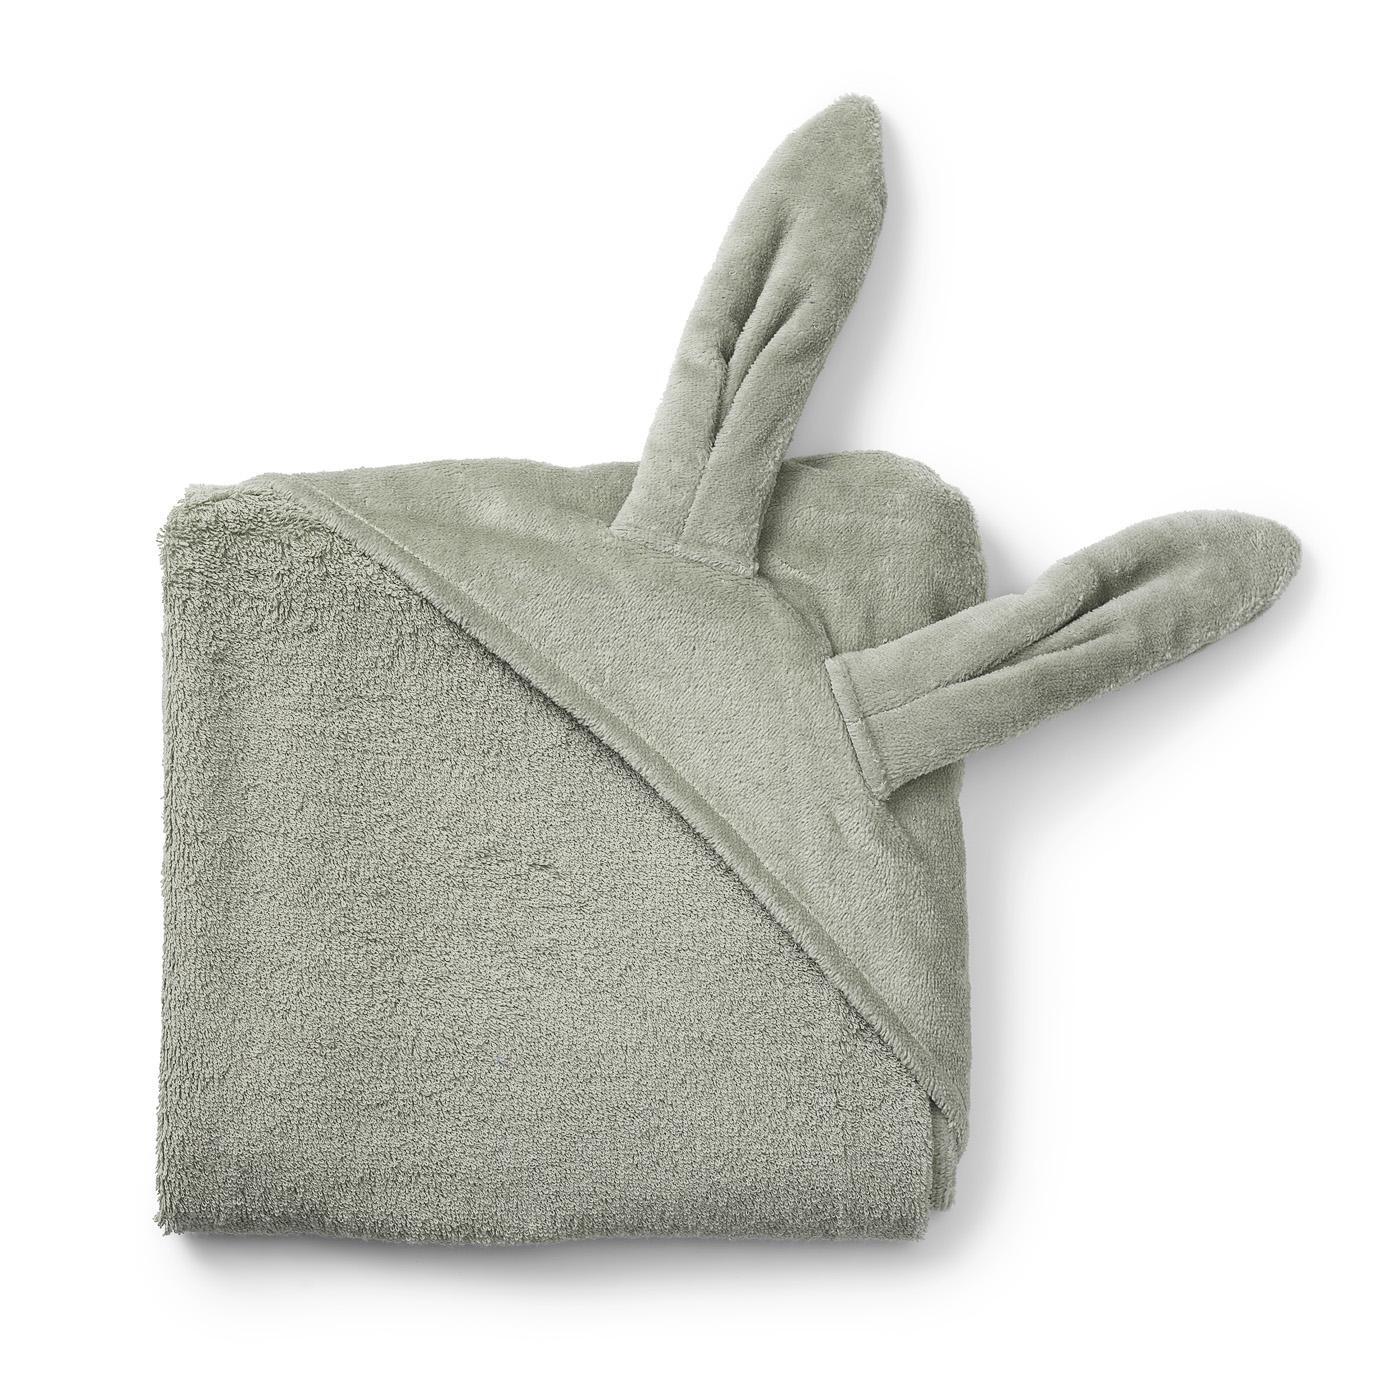 Elodie Details Hooded Towel  Mineral Green Bunny One Size Mint - Elodie Details